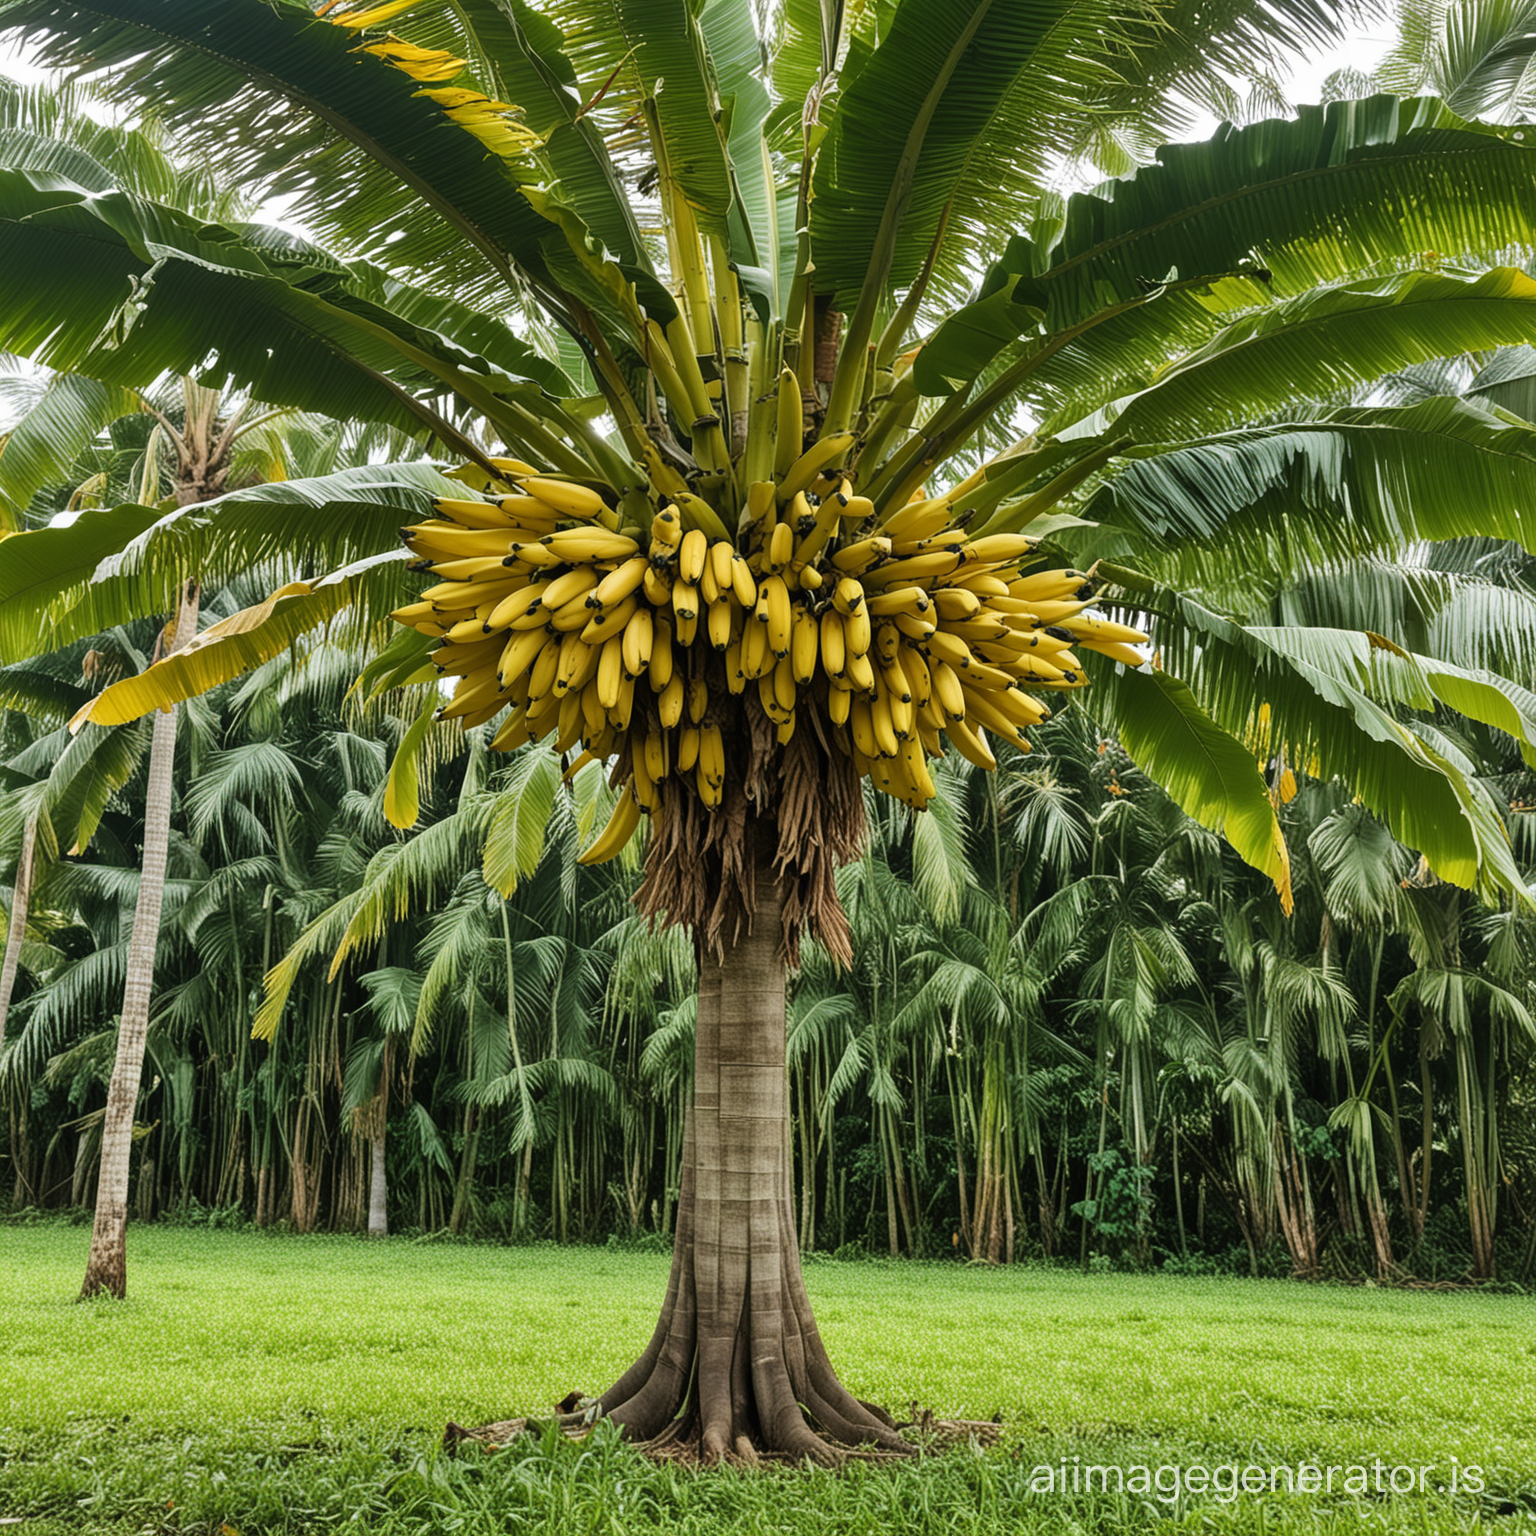 In a island has very of banana tree and all banana are yellow and all tree are Aline 